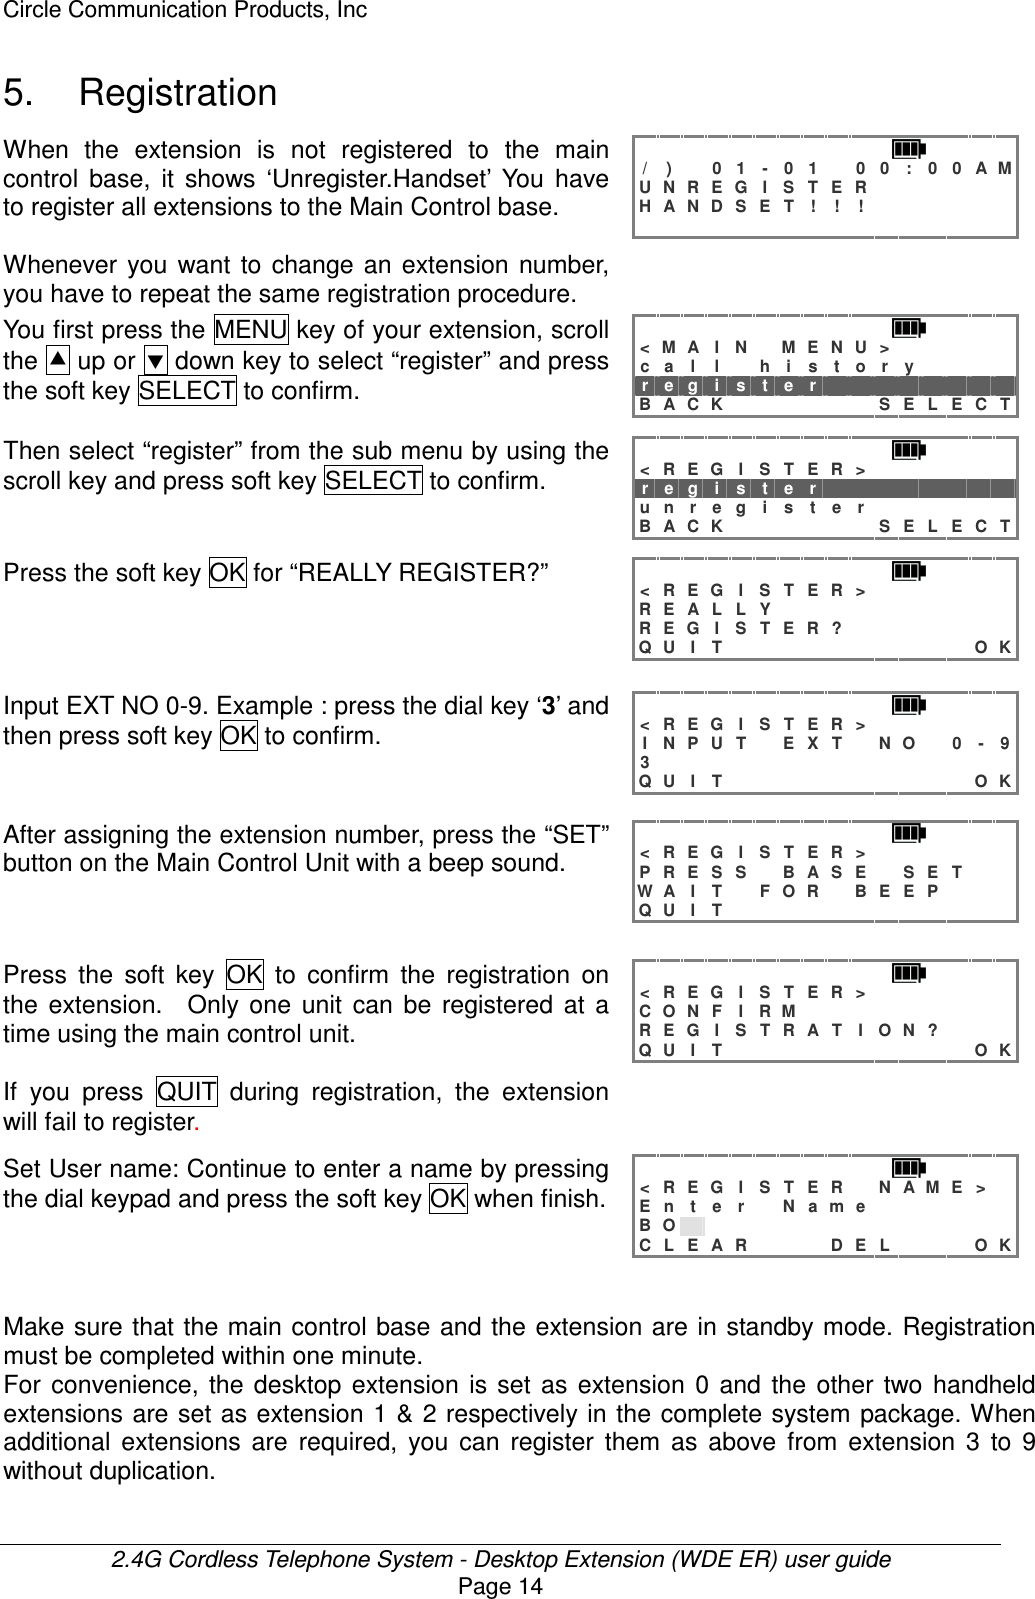 Circle Communication Products, Inc  2.4G Cordless Telephone System - Desktop Extension (WDE ER) user guide Page 14 5.  Registration When  the  extension  is  not  registered  to  the  main control  base,  it  shows  ‘Unregister.Handset’  You  have to register all extensions to the Main Control base.  Whenever you  want  to  change  an  extension  number, you have to repeat the same registration procedure. / )  0 1 - 0 1  0 0 : 0 0 A M U N R E G I S T E R       H A N D S E T ! ! !                       You first press the MENU key of your extension, scroll the  up or  down key to select “register” and press the soft key SELECT to confirm.  &lt; M A I N  M E N U &gt;      c a l l  h i s t o r y     r e g i s t e r         B A C K       S E L E C T  Then select “register” from the sub menu by using the scroll key and press soft key SELECT to confirm. &lt; R E G I  S T E R &gt;       r e g i s t e r         u n r e g i s t e r       B A C K       S E L E C T Press the soft key OK for “REALLY REGISTER?” &lt; R E G I  S T E R &gt;       R E A L L Y           R E G I S T E R ?        Q U I T           O K Input EXT NO 0-9. Example : press the dial key ‘3’ and then press soft key OK to confirm.  &lt; R E G I  S T E R &gt;       I N P U T  E X T  N O  0 - 9 3                Q U I T           O K After assigning the extension number, press the “SET” button on the Main Control Unit with a beep sound.     &lt; R E G I  S T E R &gt;       P R E S S  B A S E  S E T   W A I T  F O R  B E E P    Q U I T             Press  the  soft  key  OK  to  confirm  the  registration  on the  extension.    Only  one  unit  can  be  registered  at  a time using the main control unit.  If  you  press  QUIT  during  registration,  the  extension will fail to register. &lt; R E G I  S T E R &gt;       C O N F I R M          R E G I S T R A T I O N ?    Q U I T           O K Set User name: Continue to enter a name by pressing the dial keypad and press the soft key OK when finish. &lt; R E G I S T E R  N A M E &gt;  E n t e r  N a m e       B O               C L E A R    D E L    O K   Make sure that the main control base and the extension are in standby mode. Registration must be completed within one minute. For  convenience,  the  desktop  extension  is  set  as  extension  0  and  the  other  two  handheld extensions are set as extension 1 &amp;  2 respectively in the complete system package. When additional  extensions  are  required,  you  can  register  them  as  above  from  extension  3  to  9 without duplication. 